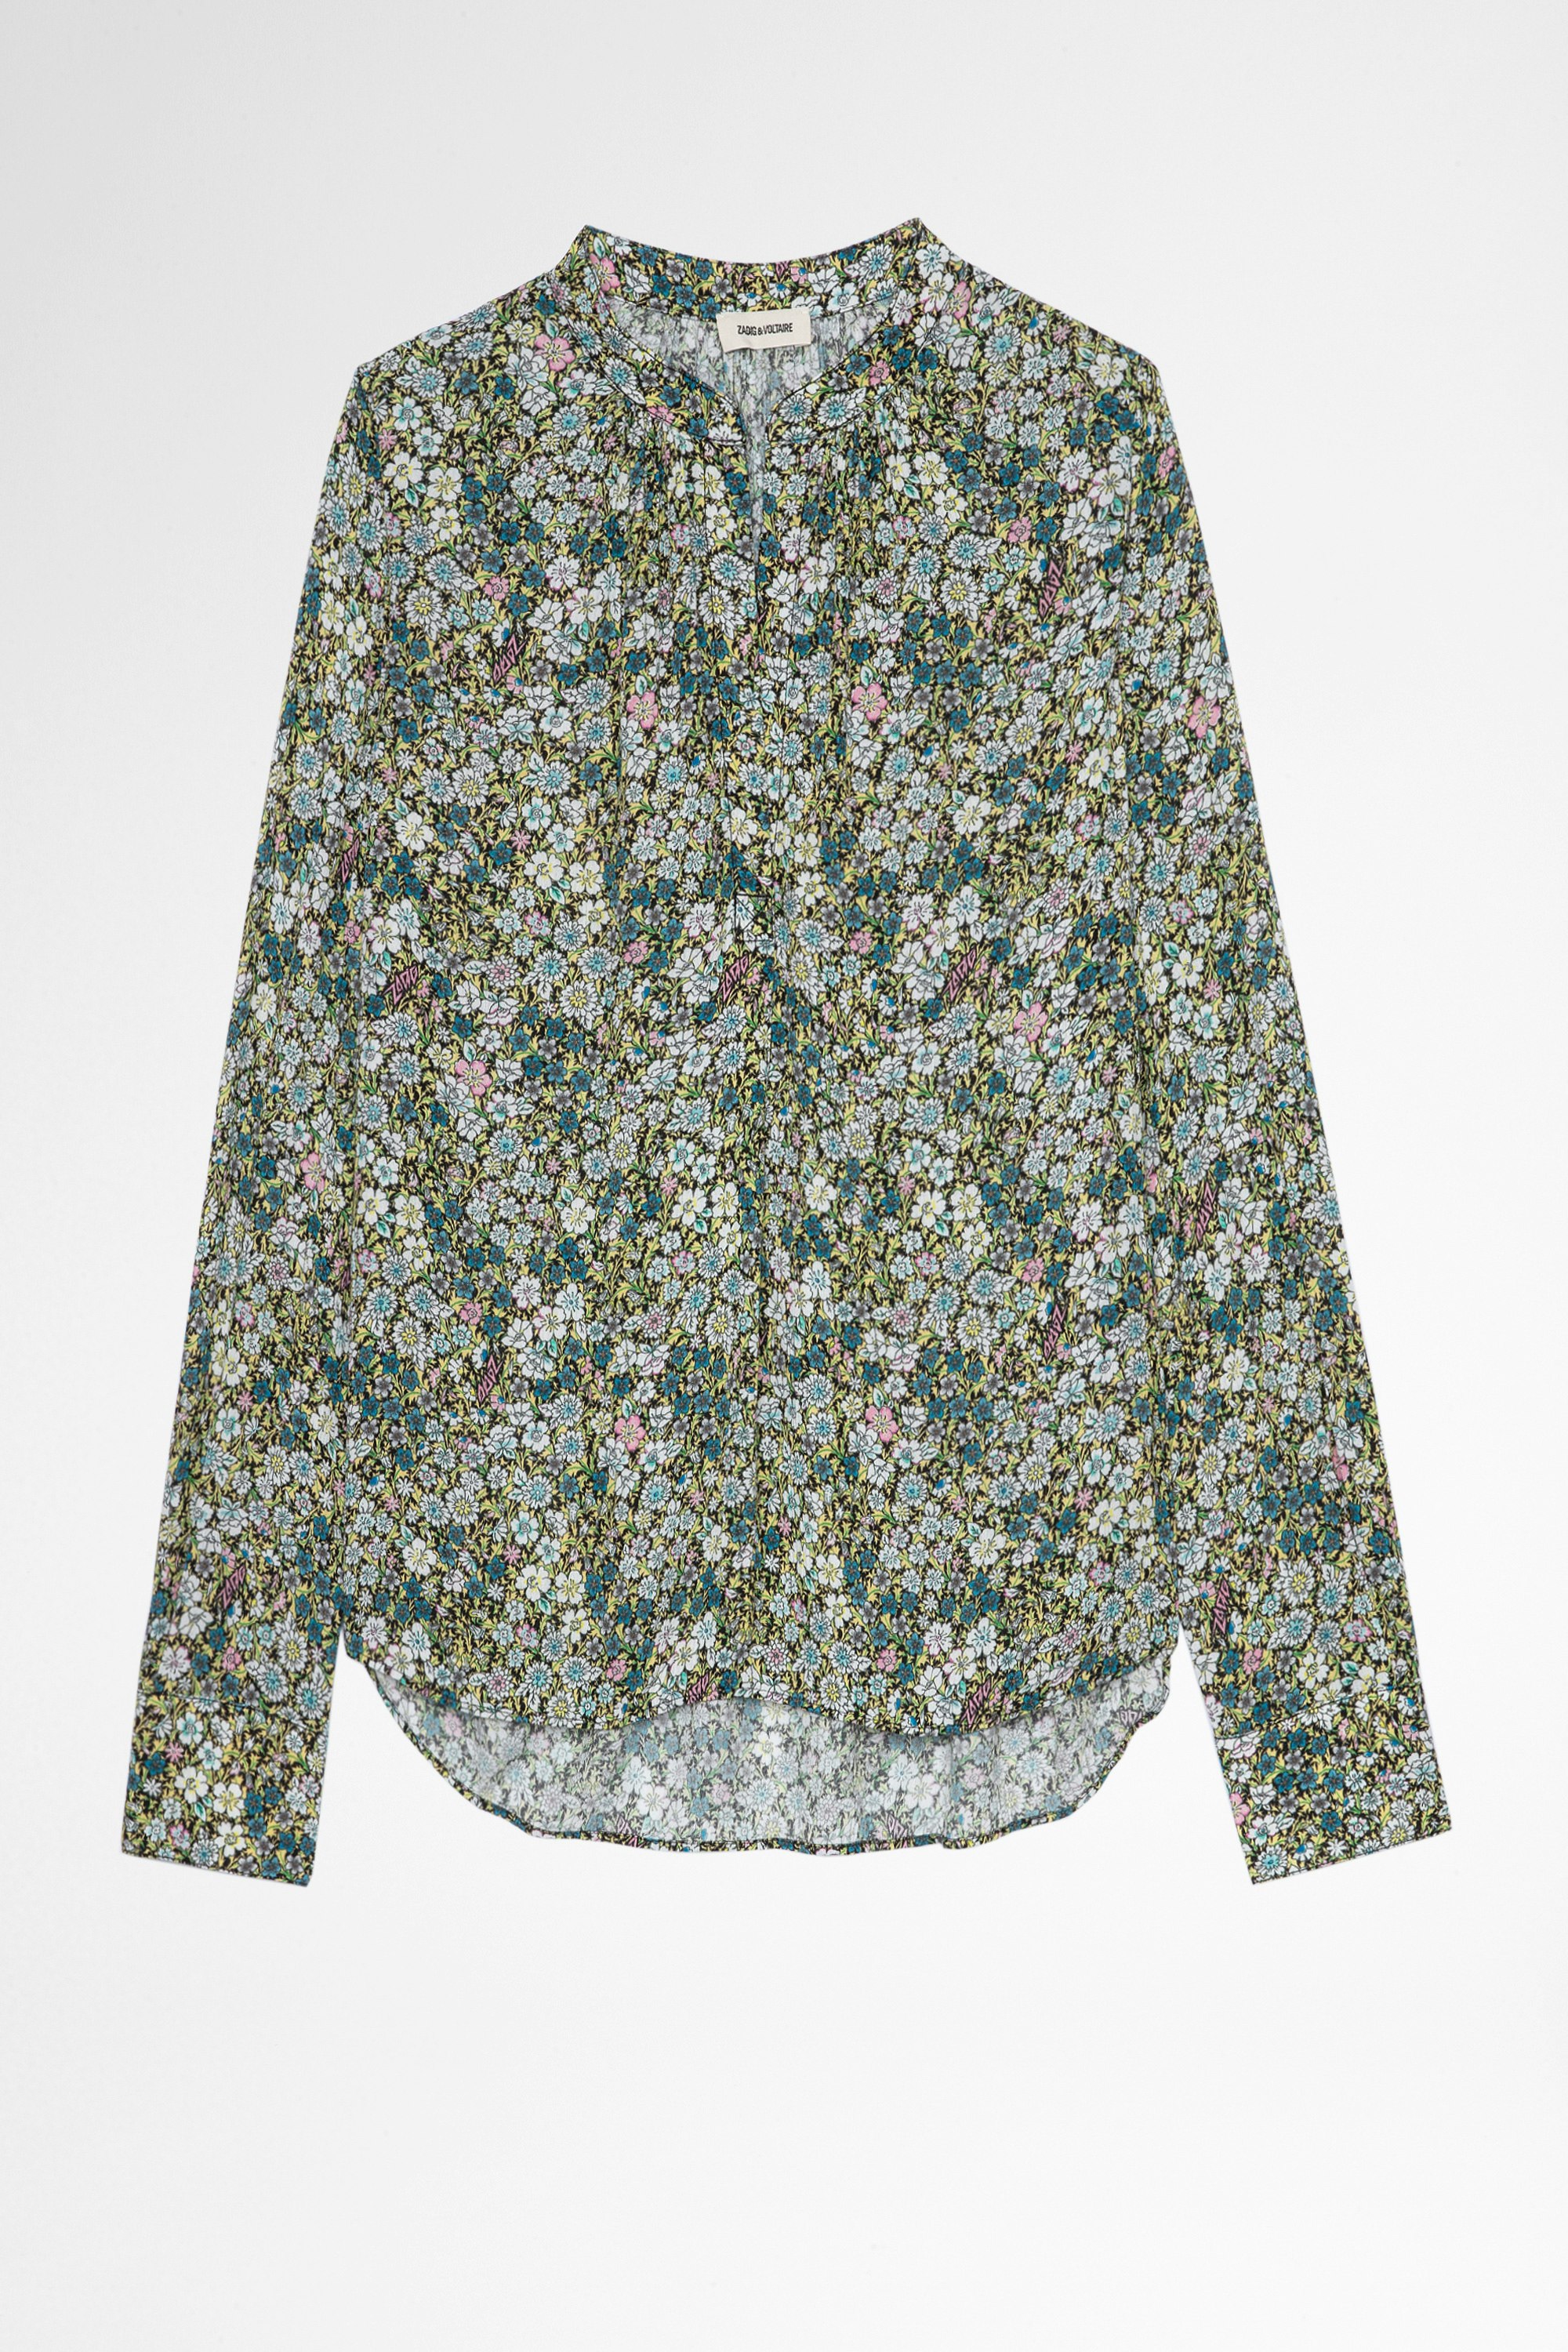 Tink Blouse Women's floral print blouse in green cotton